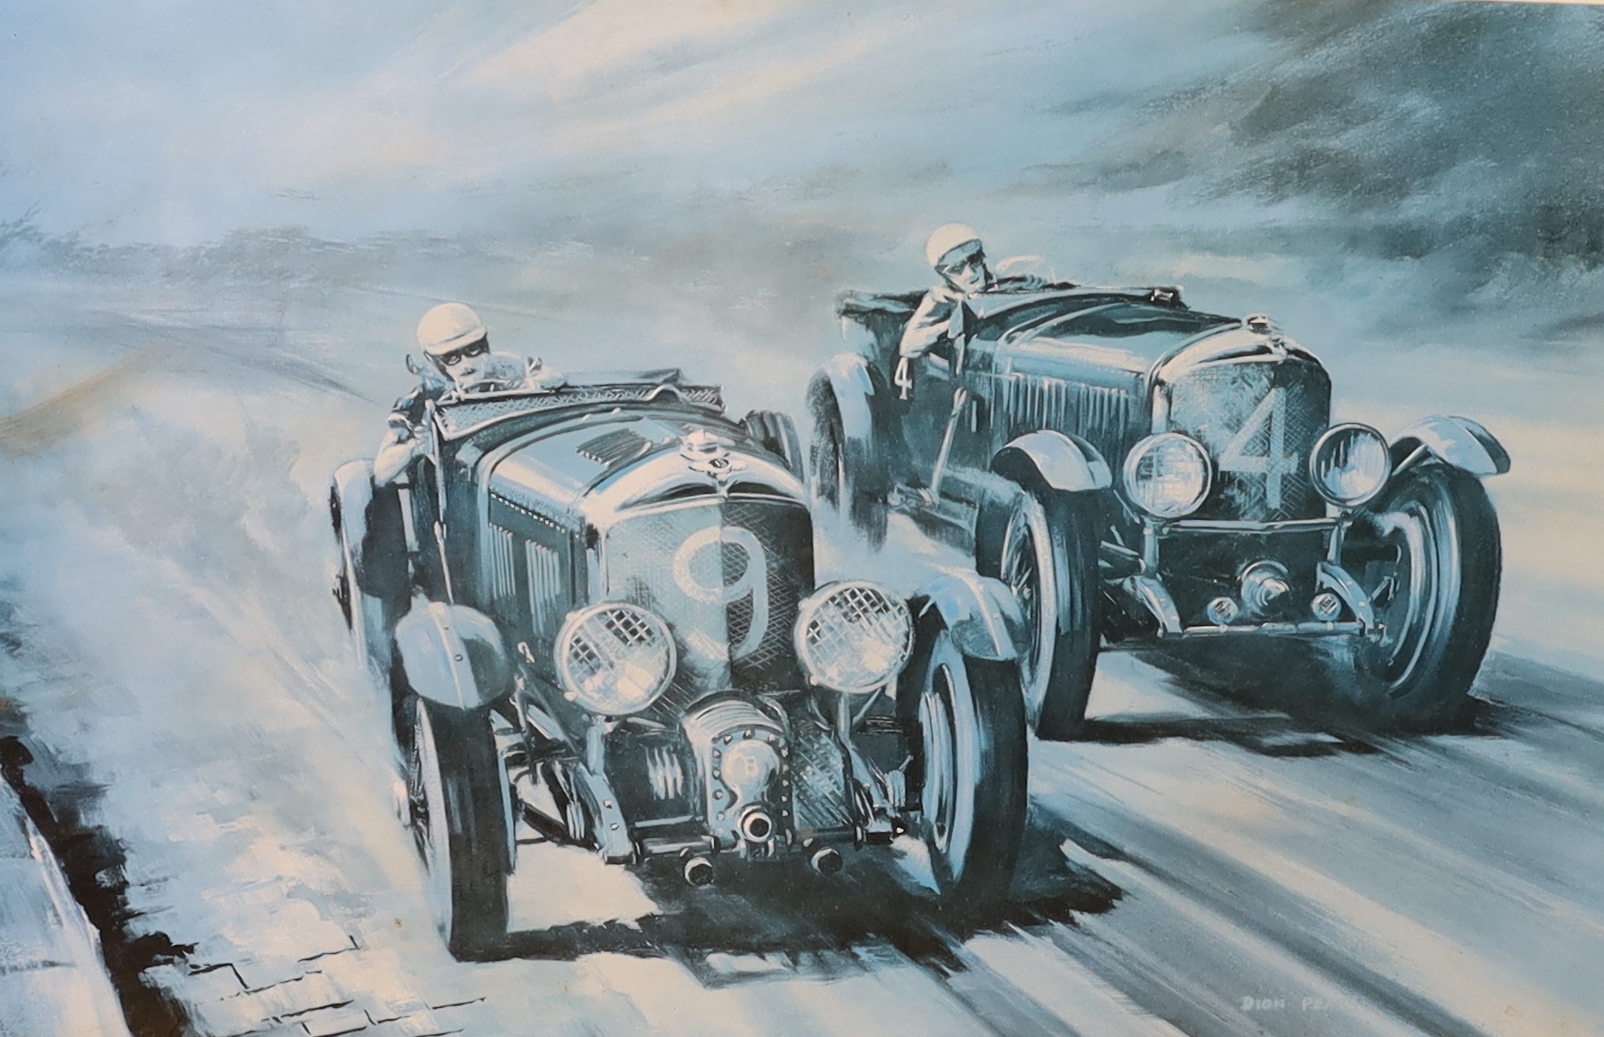 Dion Pears (1929-1985), colour lithograph, Car racing scene, signed in pencil, limited edition 56/500, blind stamped, 42 x 60cm